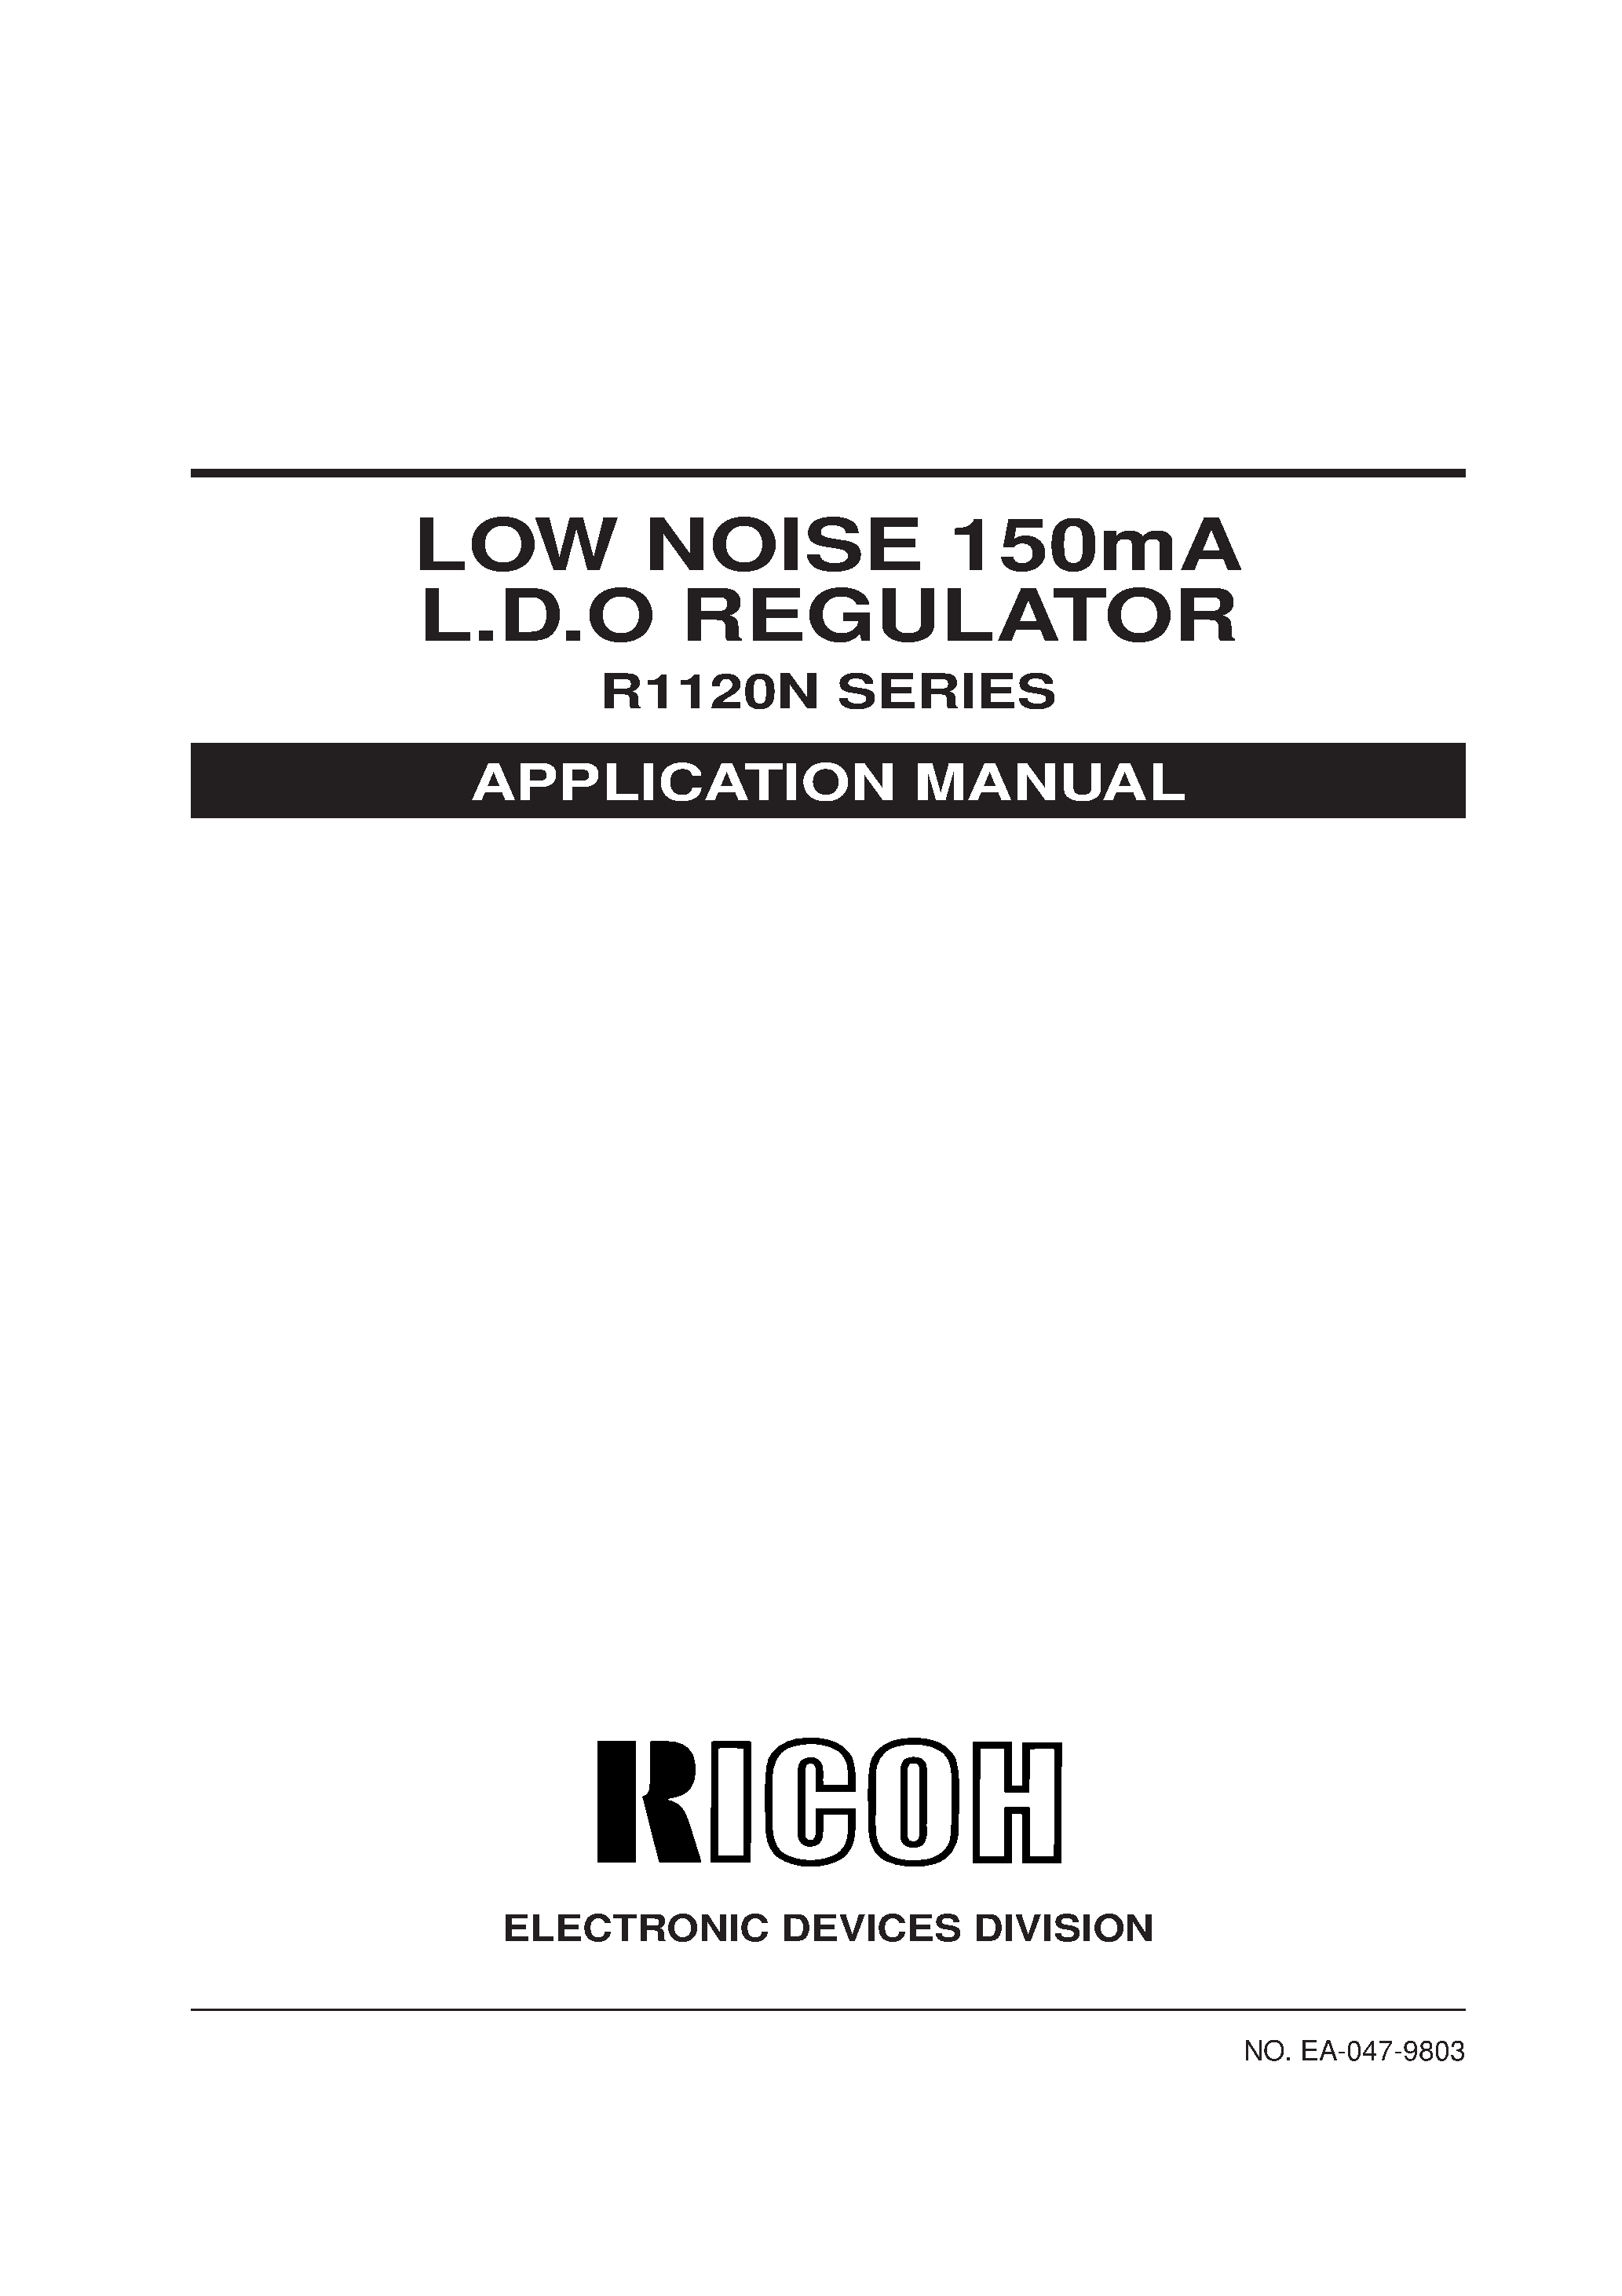 Datasheet R1120N401A - LOW NOISE 150mA L.D.O REGULATOR page 1